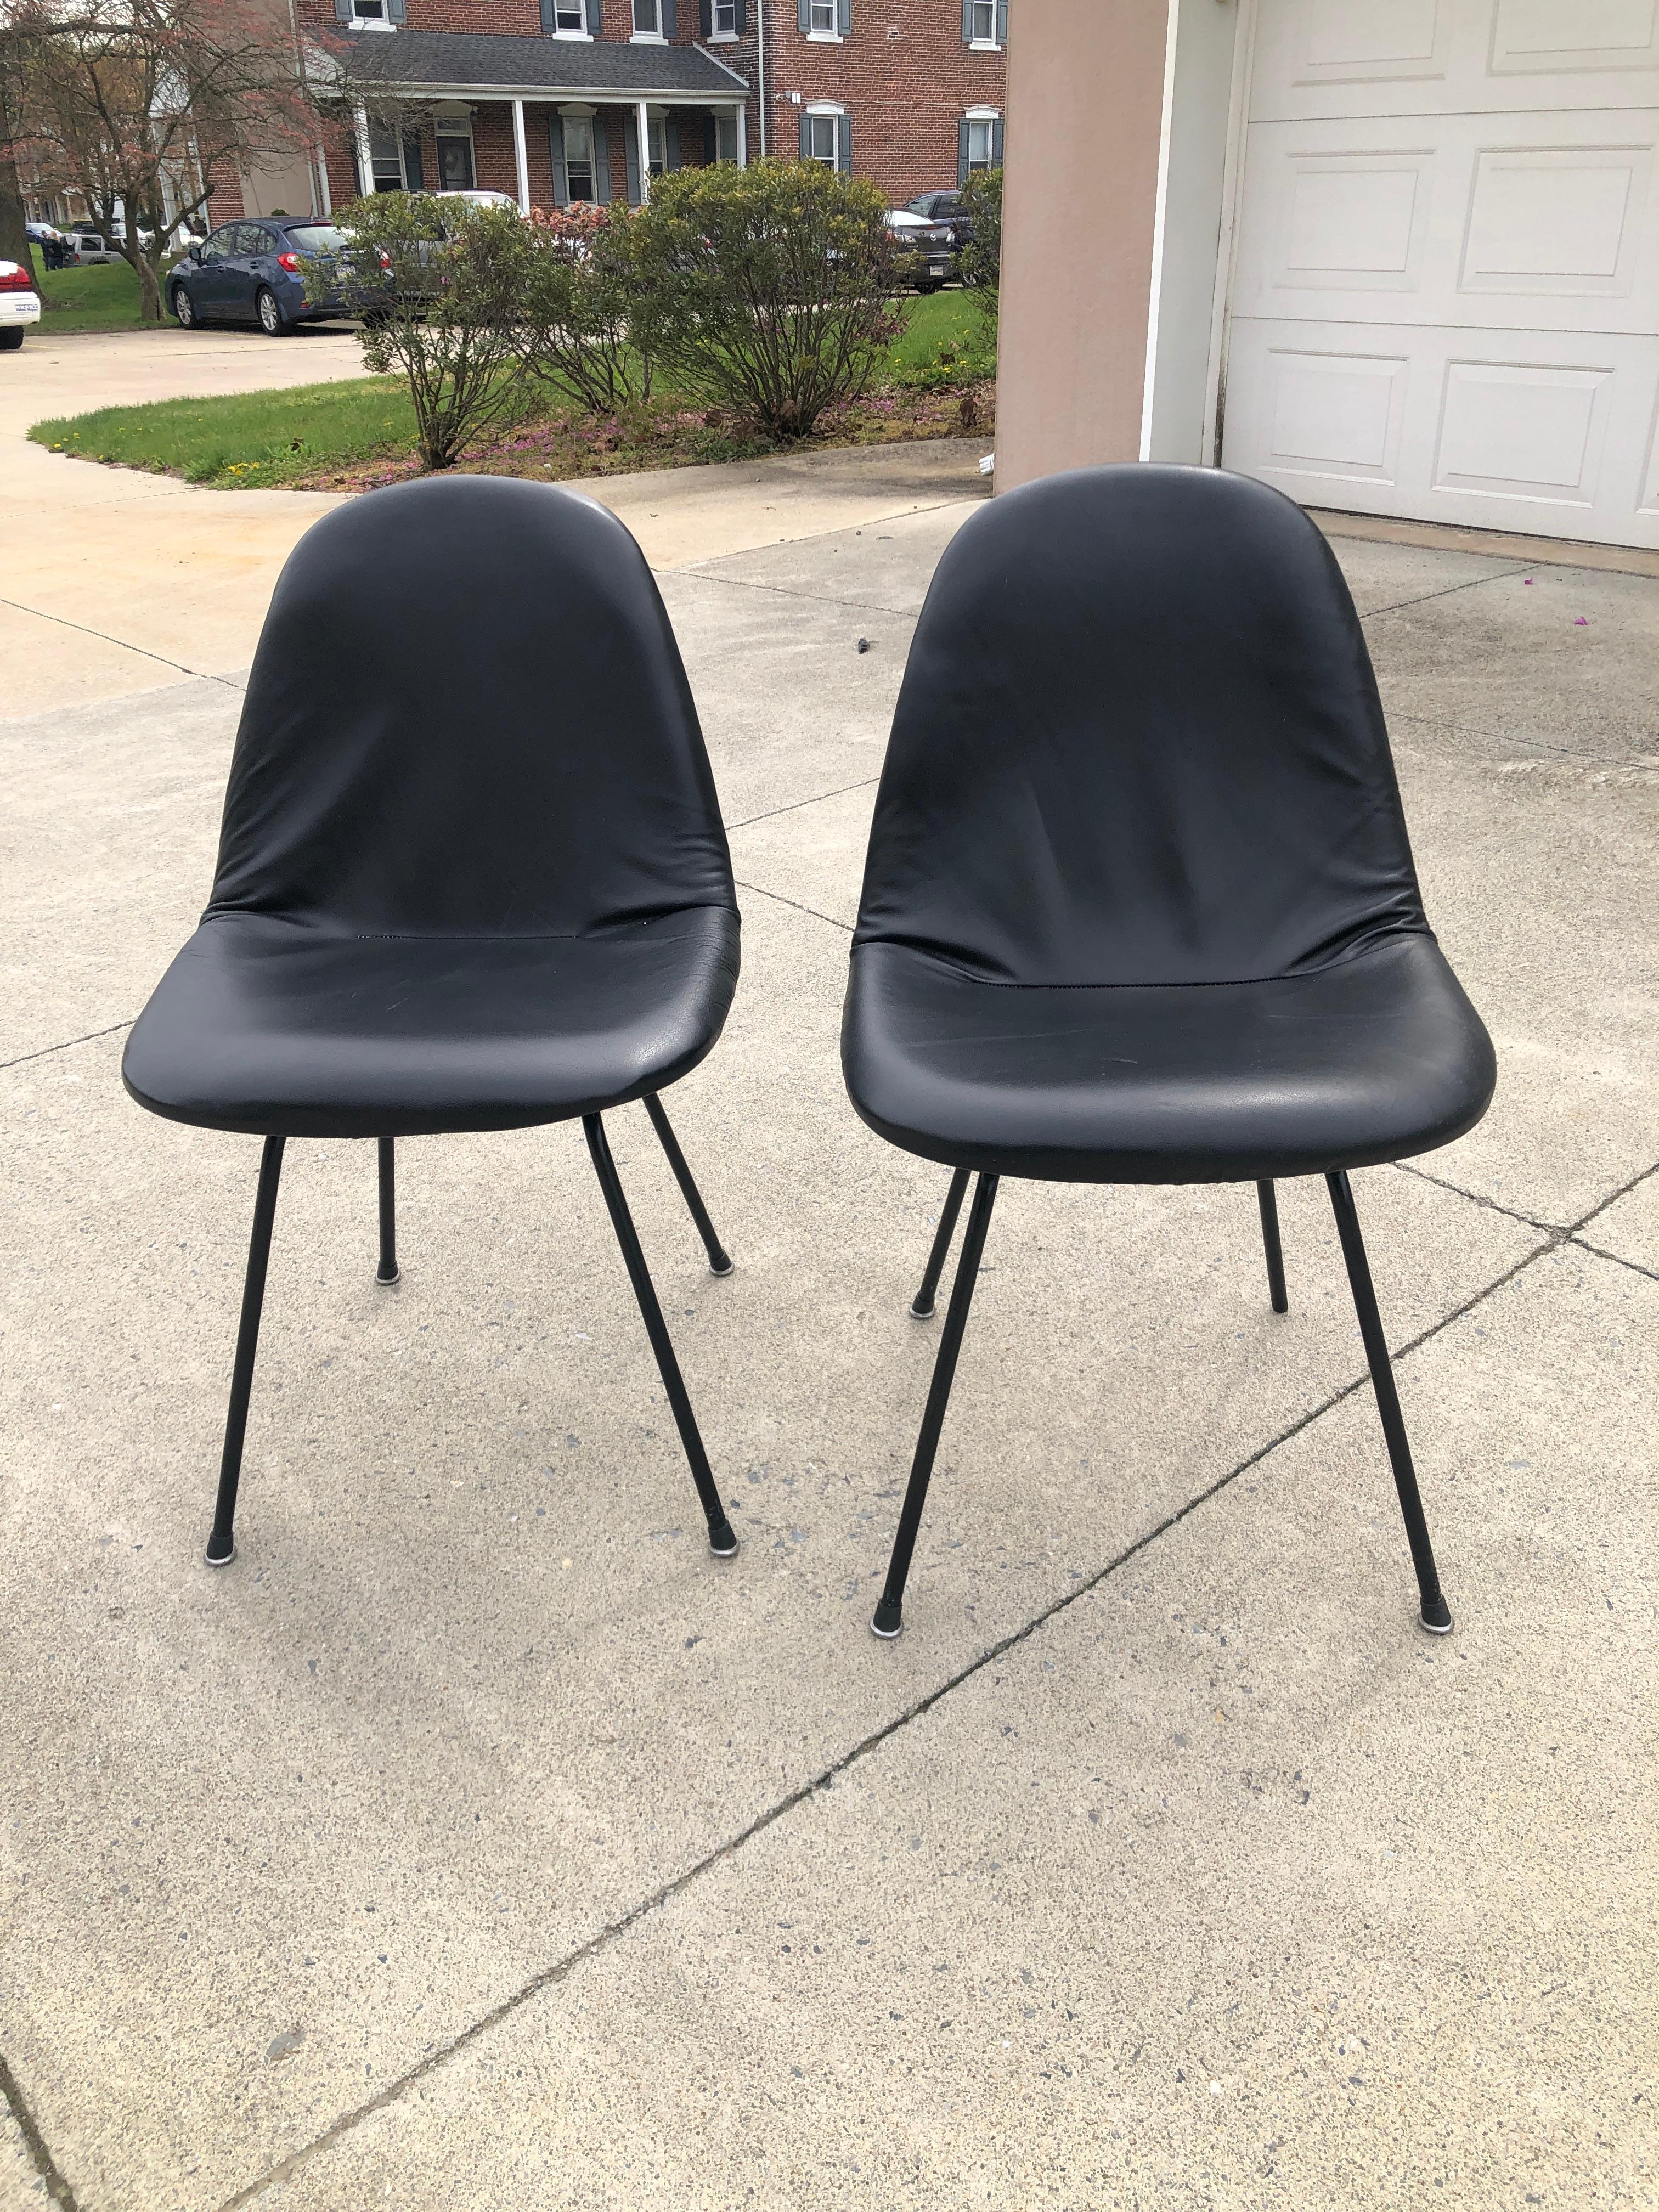 Herman Miller vintage Eames DKX four chairs black padded vinyl wire framed
Mfg 1954-1955 original glides and fabric.